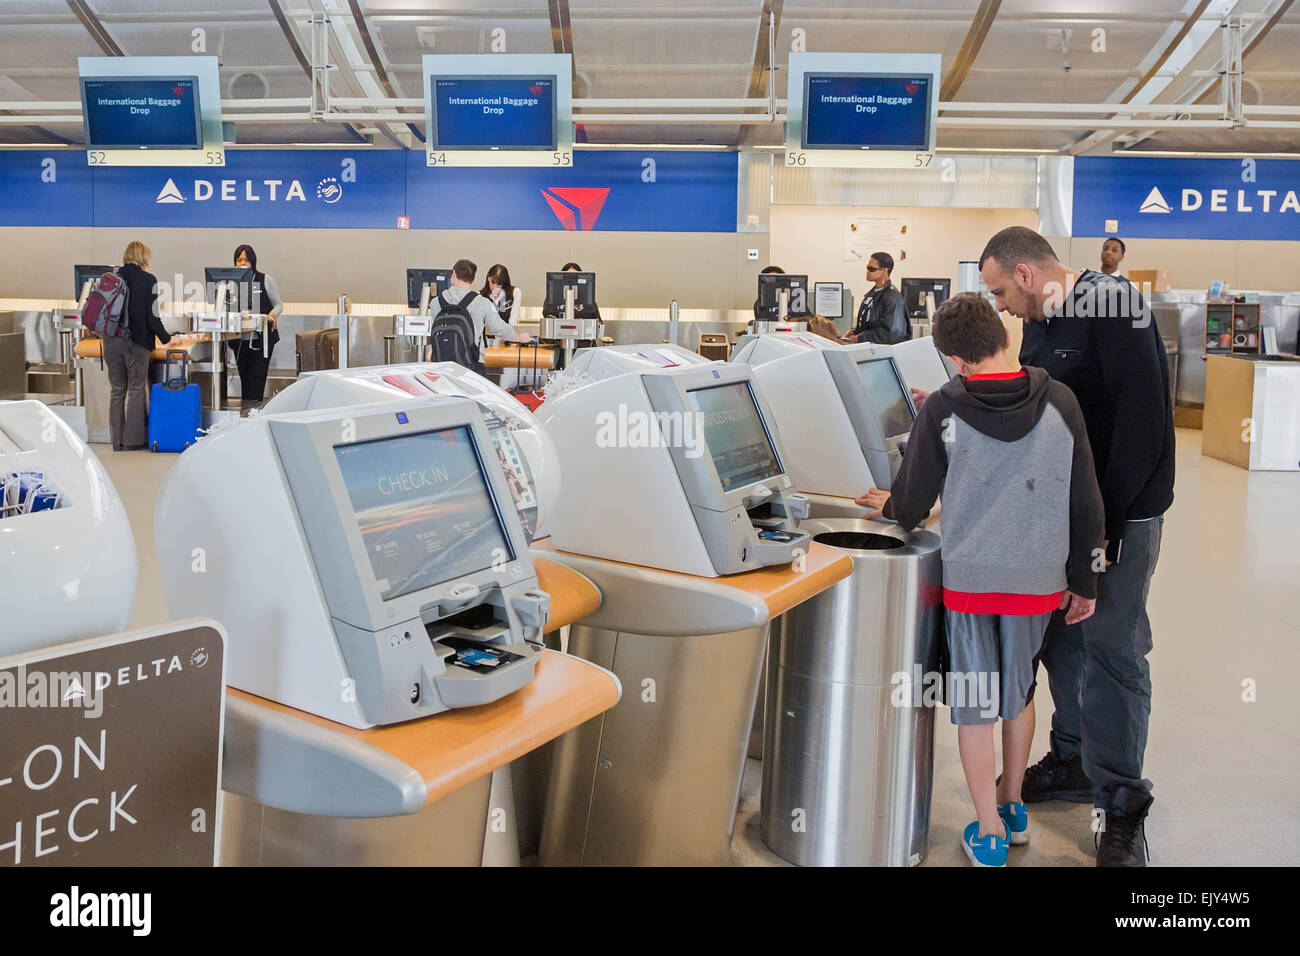 Romulus, Michigan - Passengers use self-service machines to check in for flights on Delta Air Lines at Detroit Metro Airport. Stock Photo